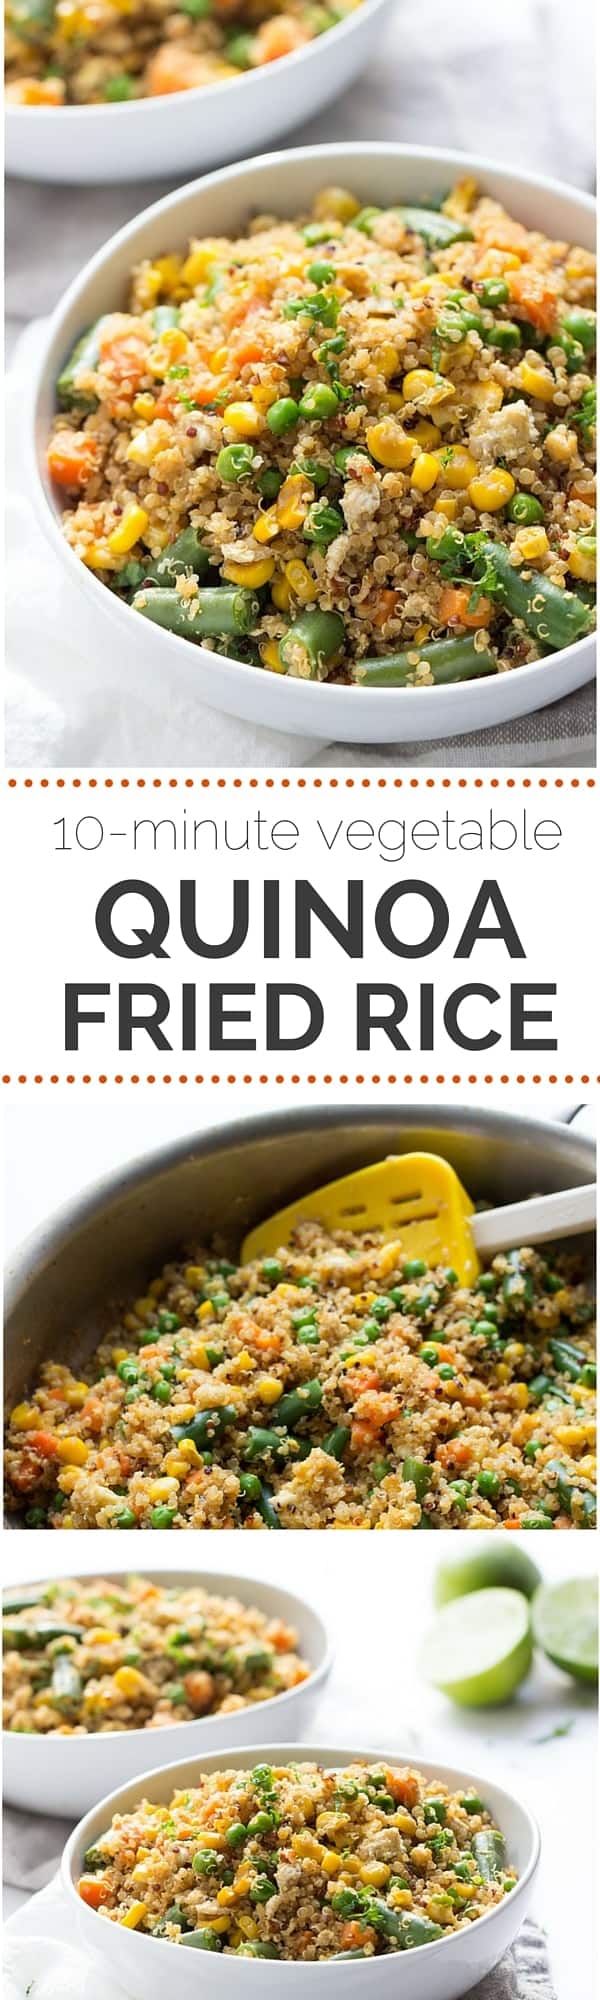 Super Easy Vegetable Quinoa Fried Rice that's made in less than 10 minutes and uses only 8 ingredients! (it's also gluten-free + vegetarian)